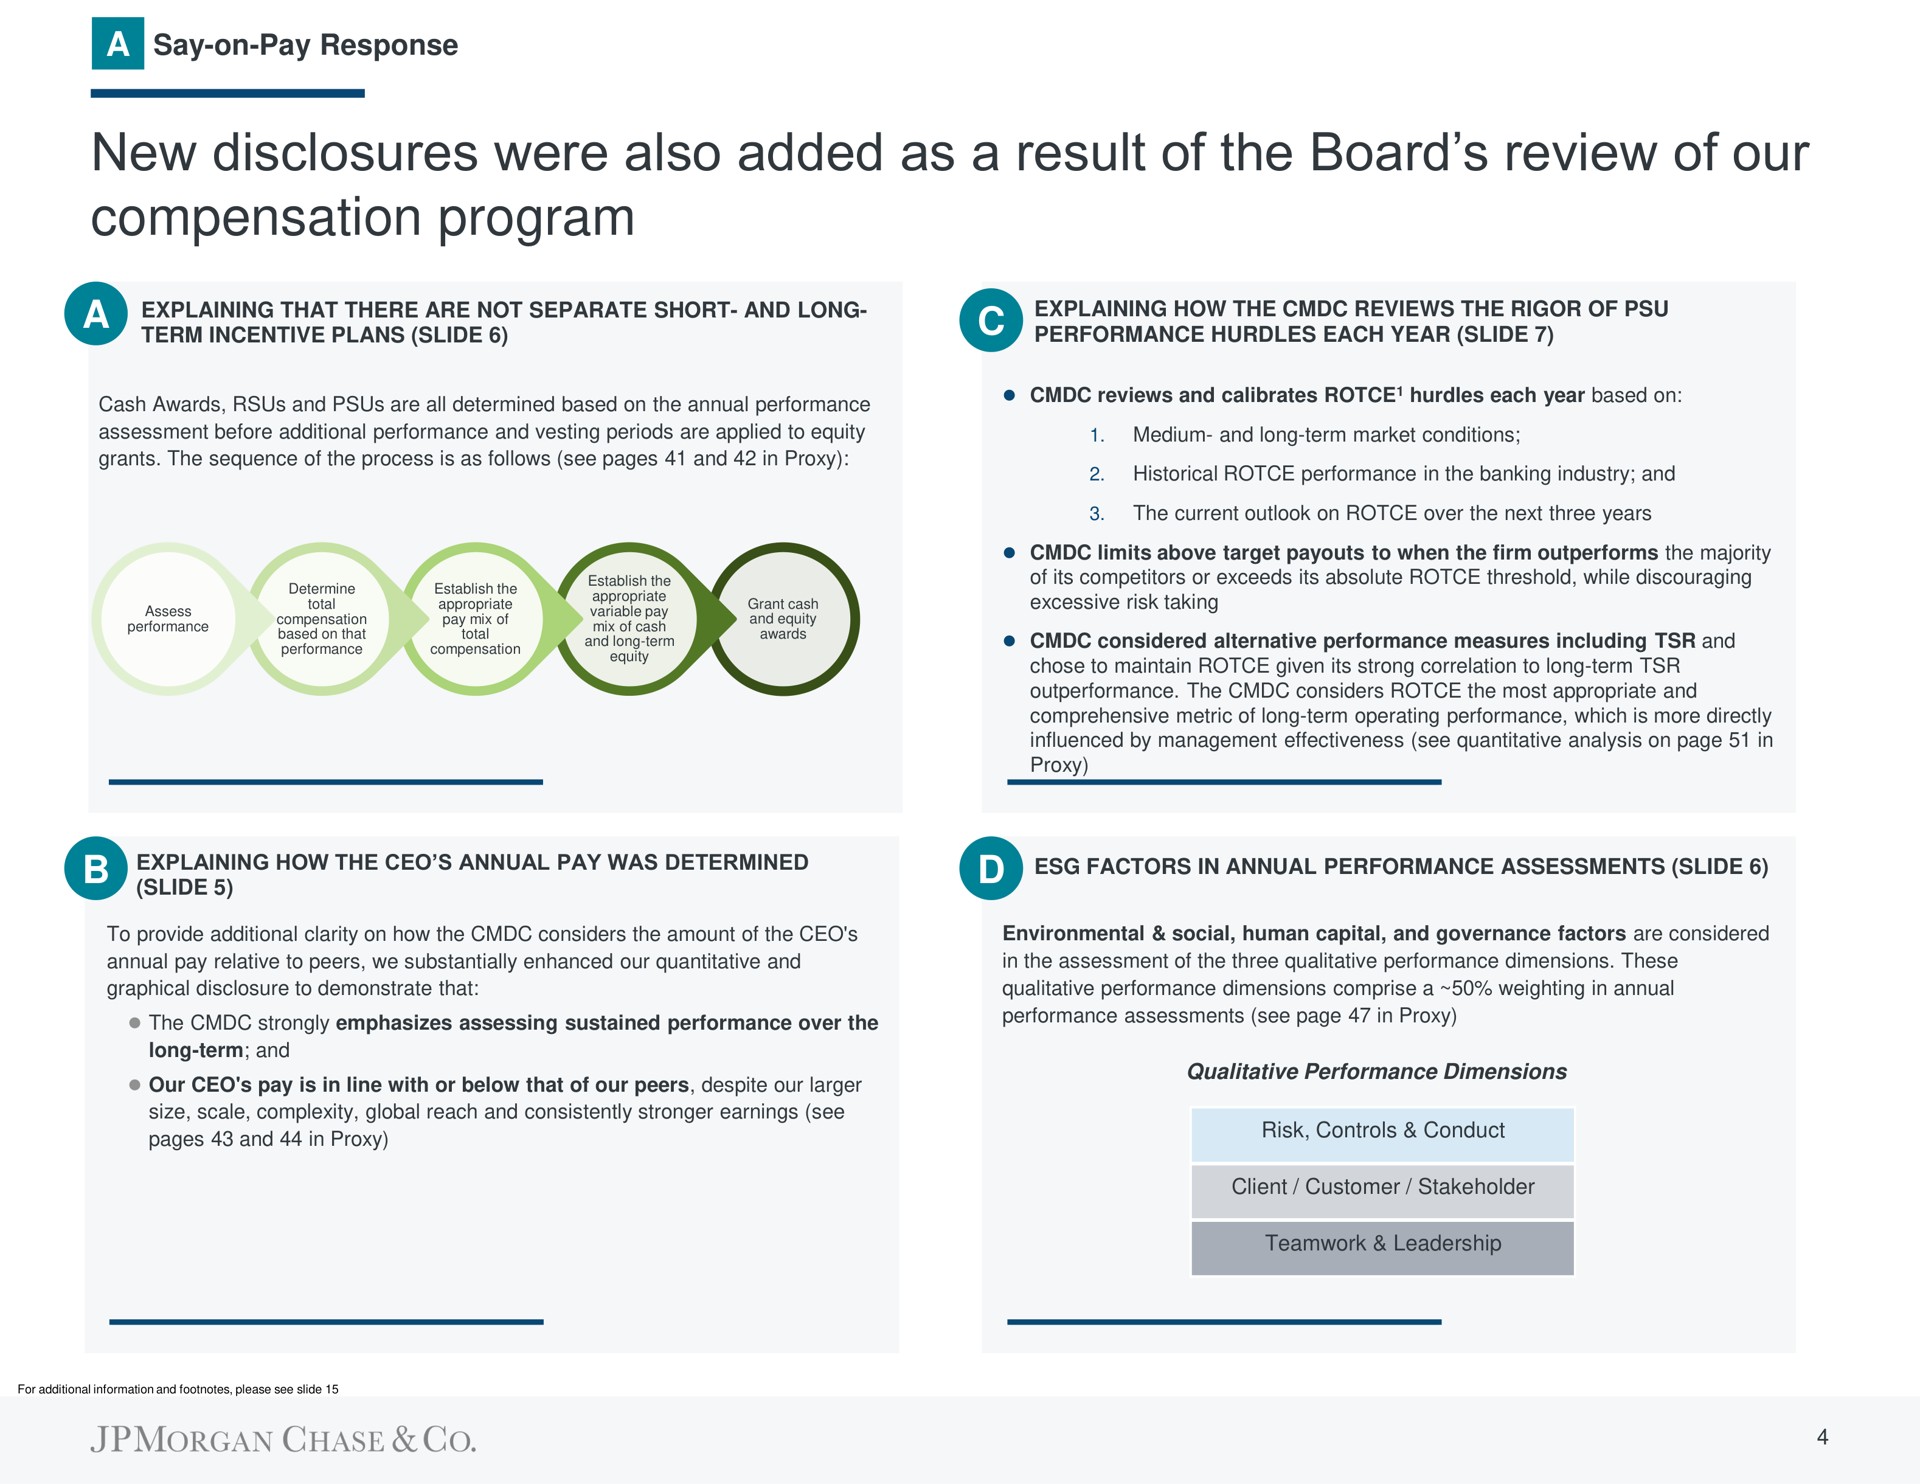 new disclosures were also added as a result of the board review of our compensation program | J.P.Morgan